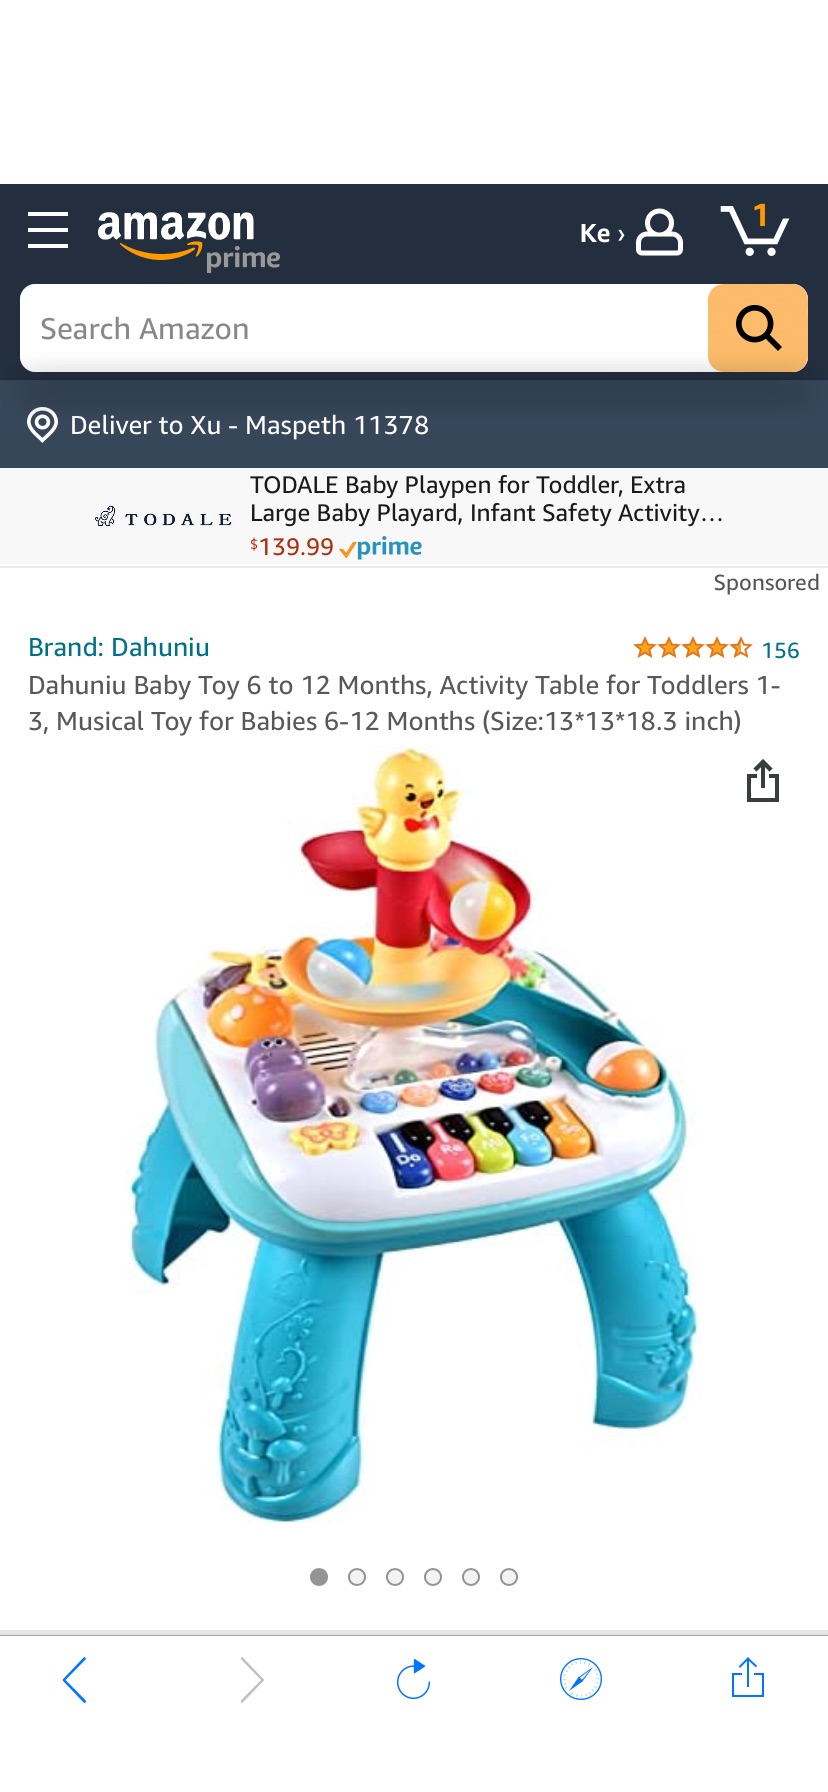 Dahuniu Baby Toy 6 to 12 Months, Activity Table for Toddlers 1-3, Musical Toy for Babies 6-12 Months (Size:13*13*18.3 inch) : Toys & Games 儿童音乐玩具桌